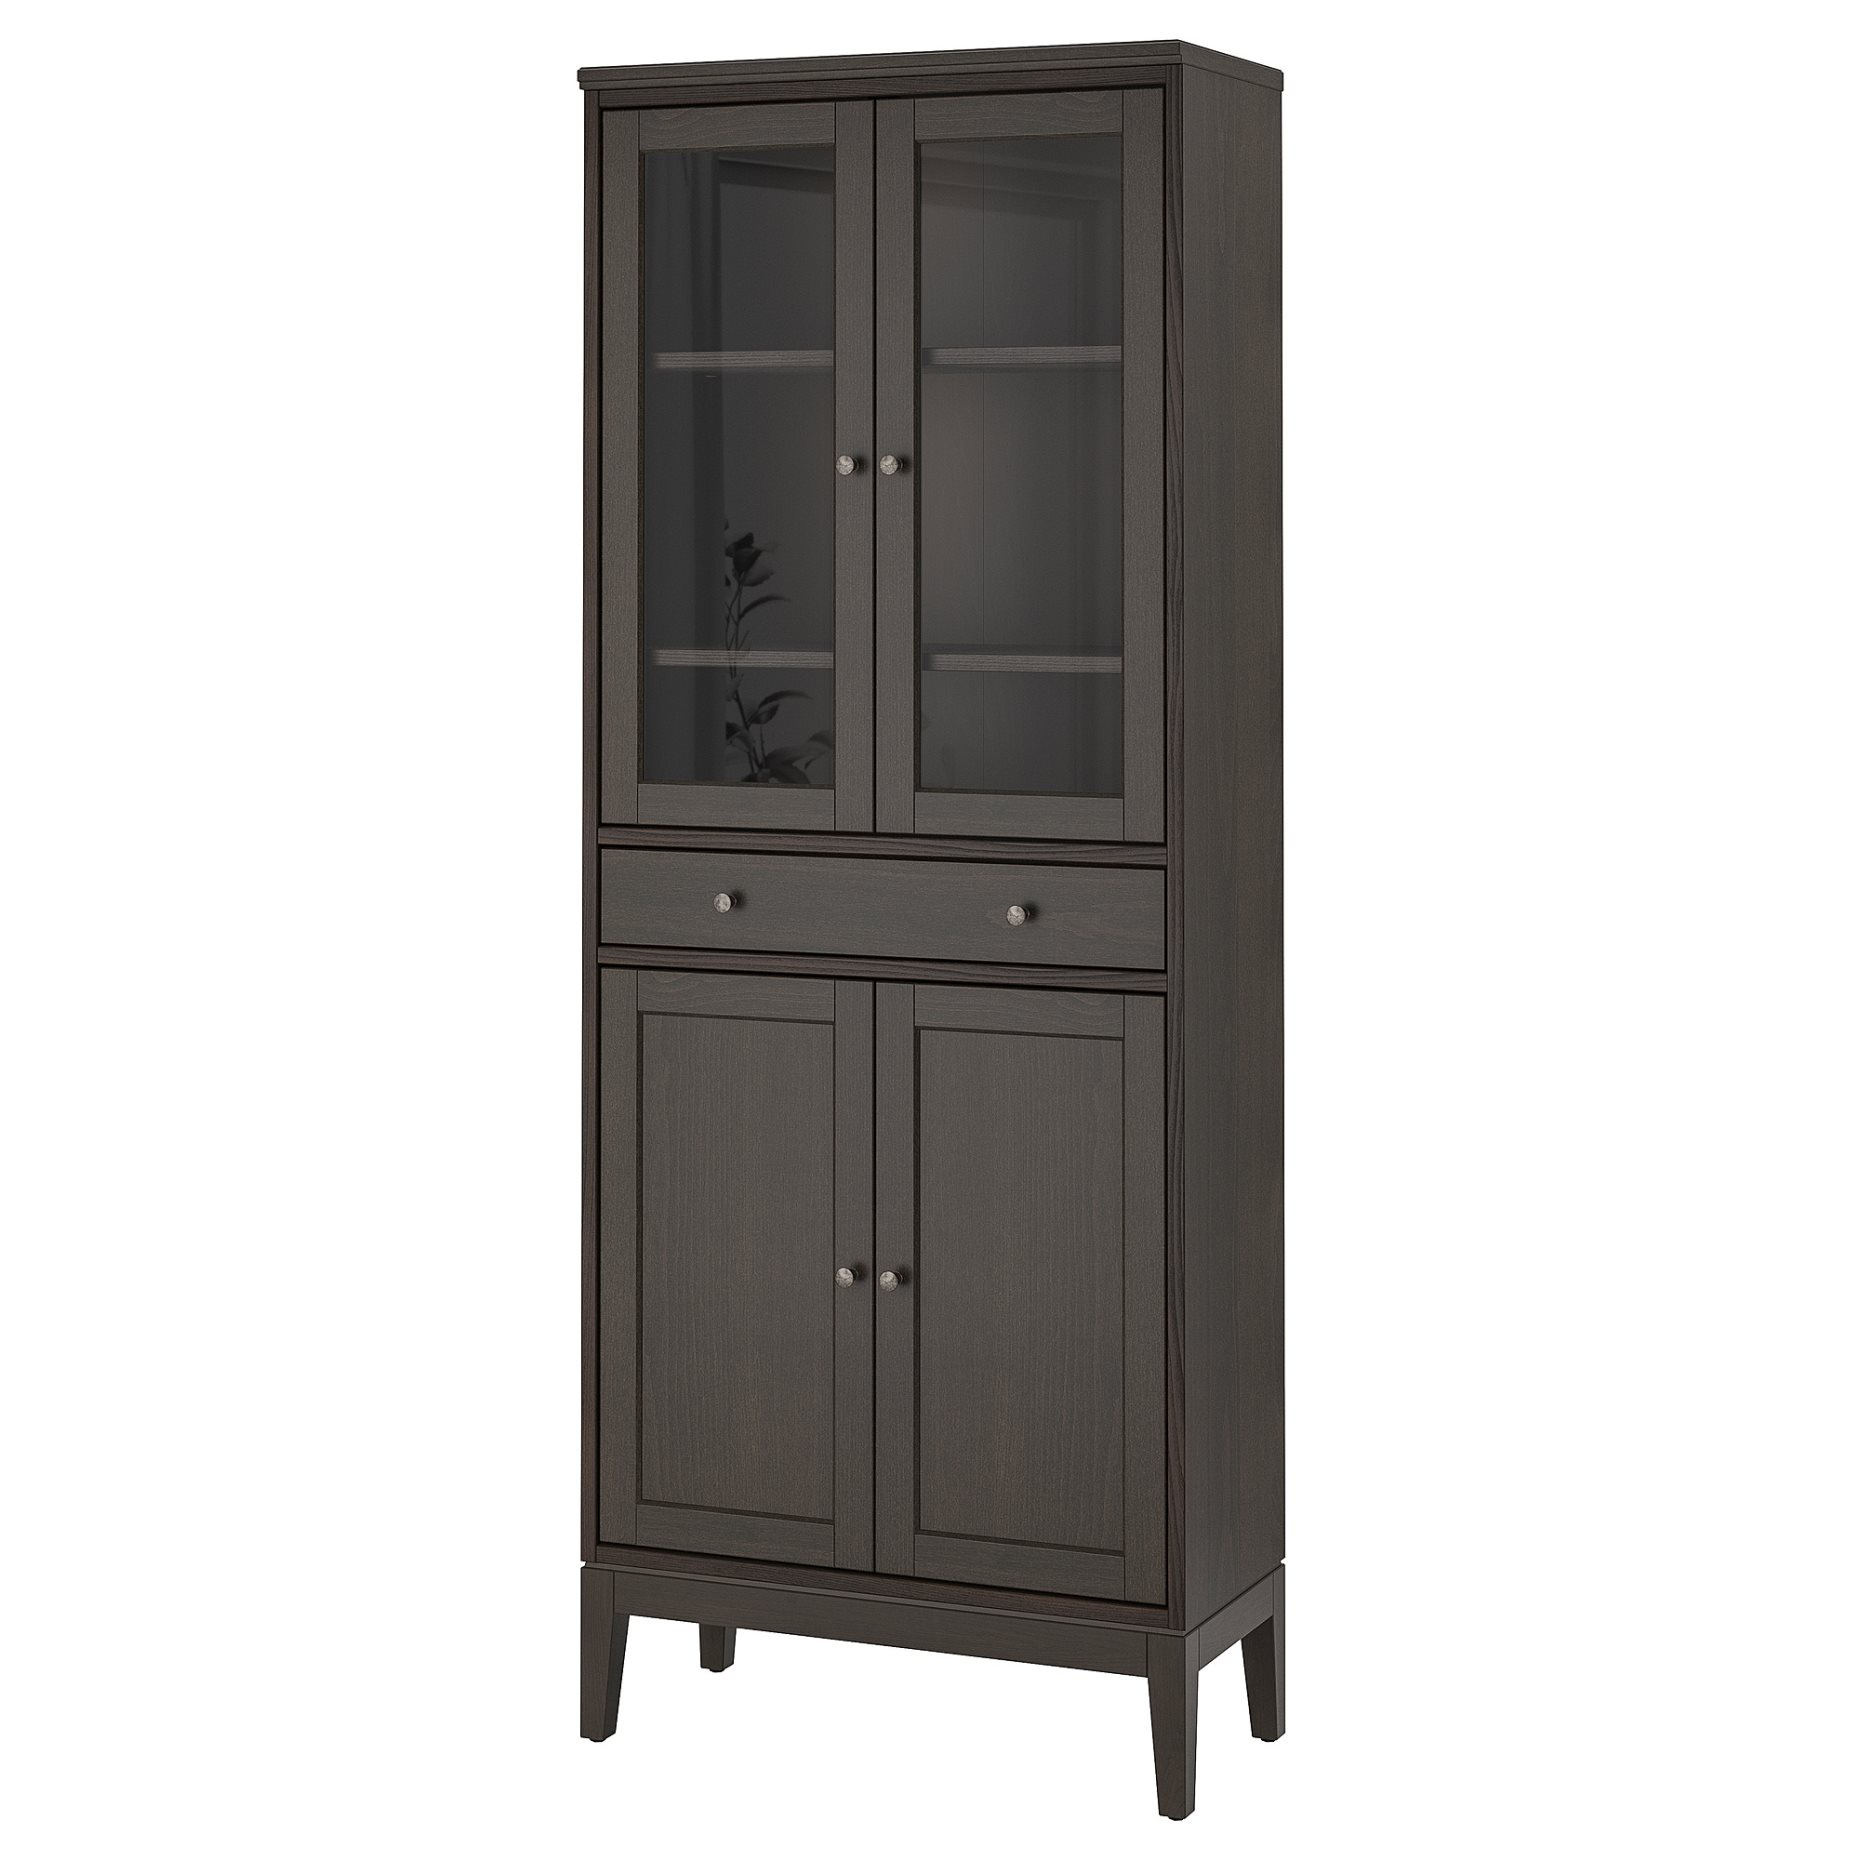 IDANÄS, high cabinet with glass-doors and 1 drawer, 81x39x211 cm, 704.878.37